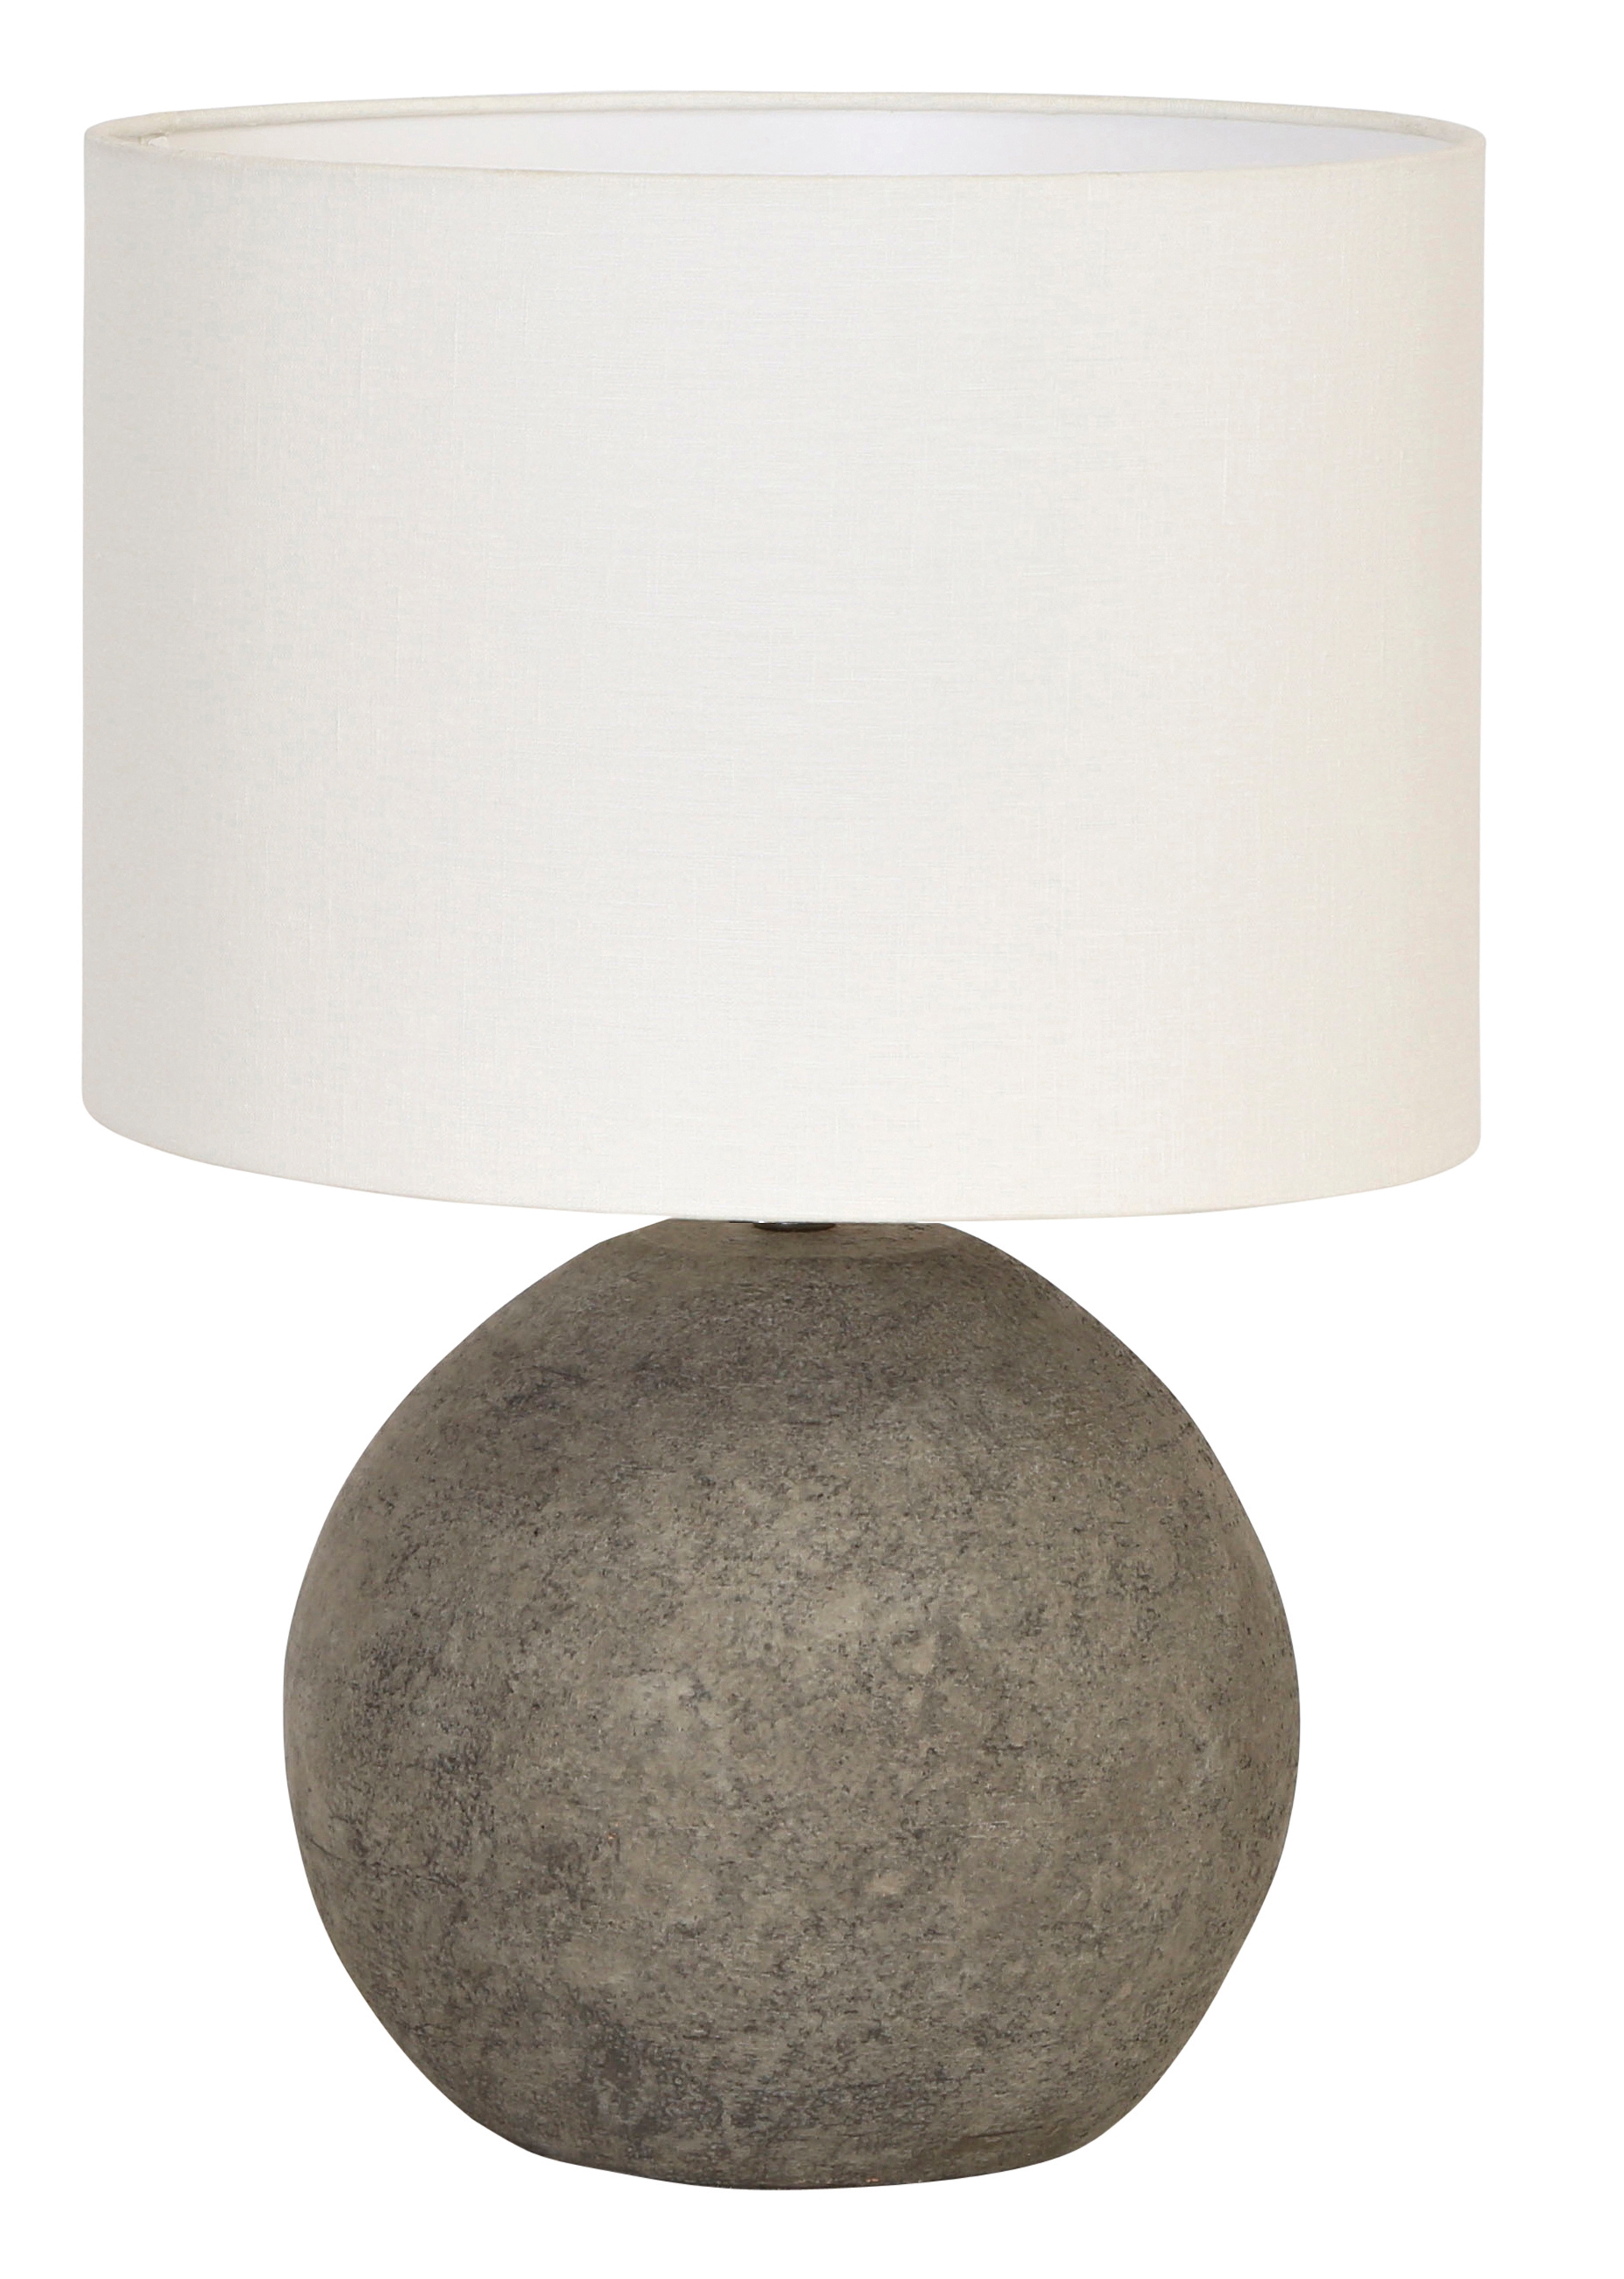 Terracotta Table Lamp with Canvas Shade & Distressed Finish - Image 0